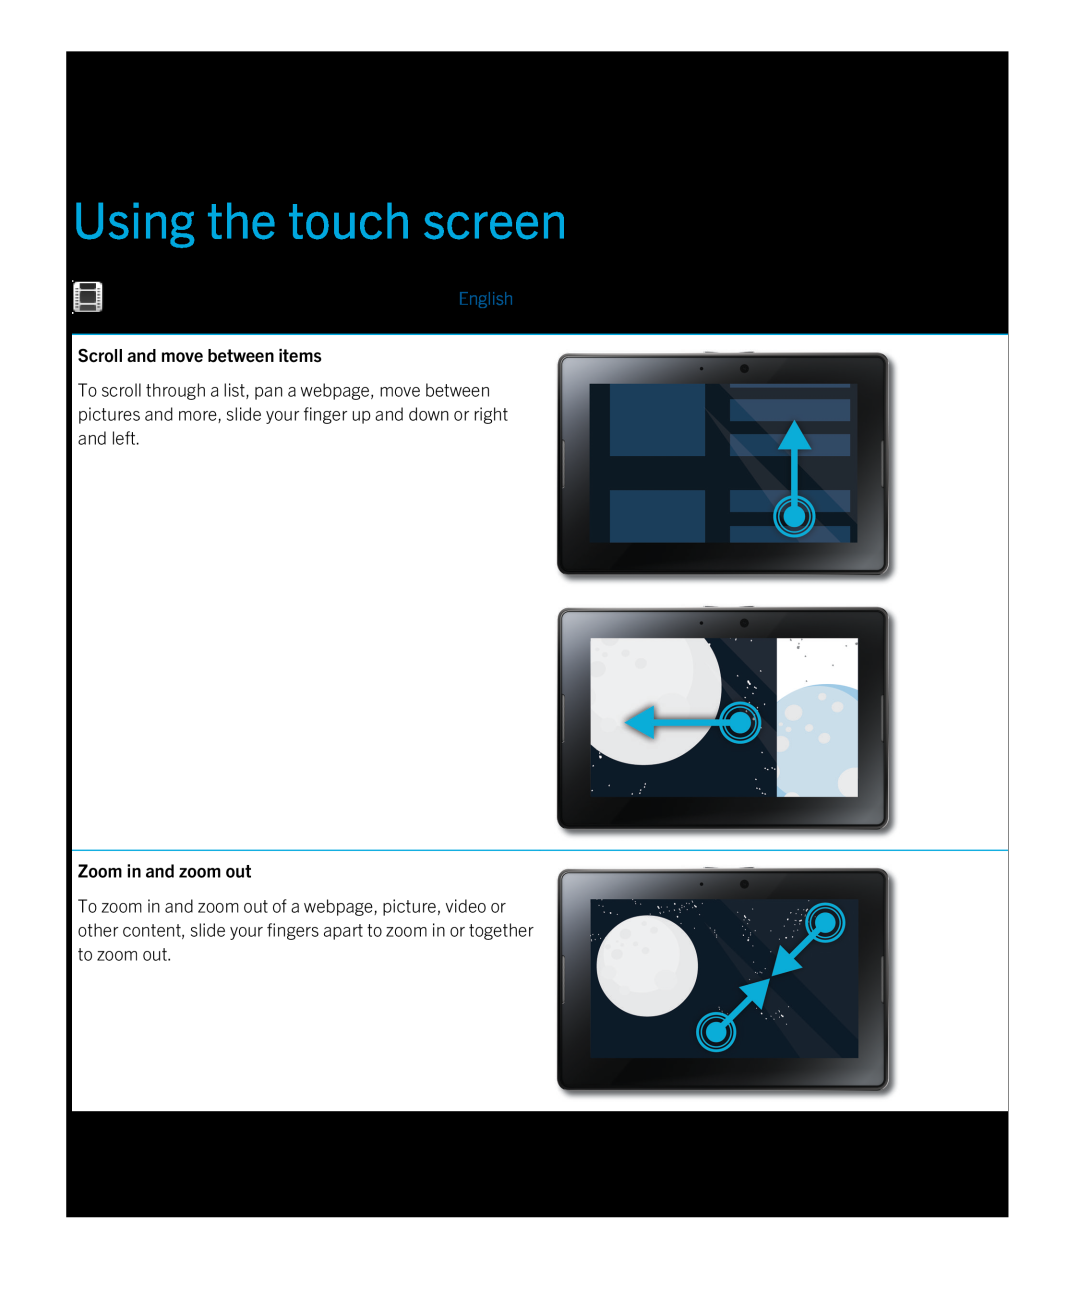 Blackberry 2.0.1 manual Using the touch screen, Scroll and move between items, Zoom in and zoom out 